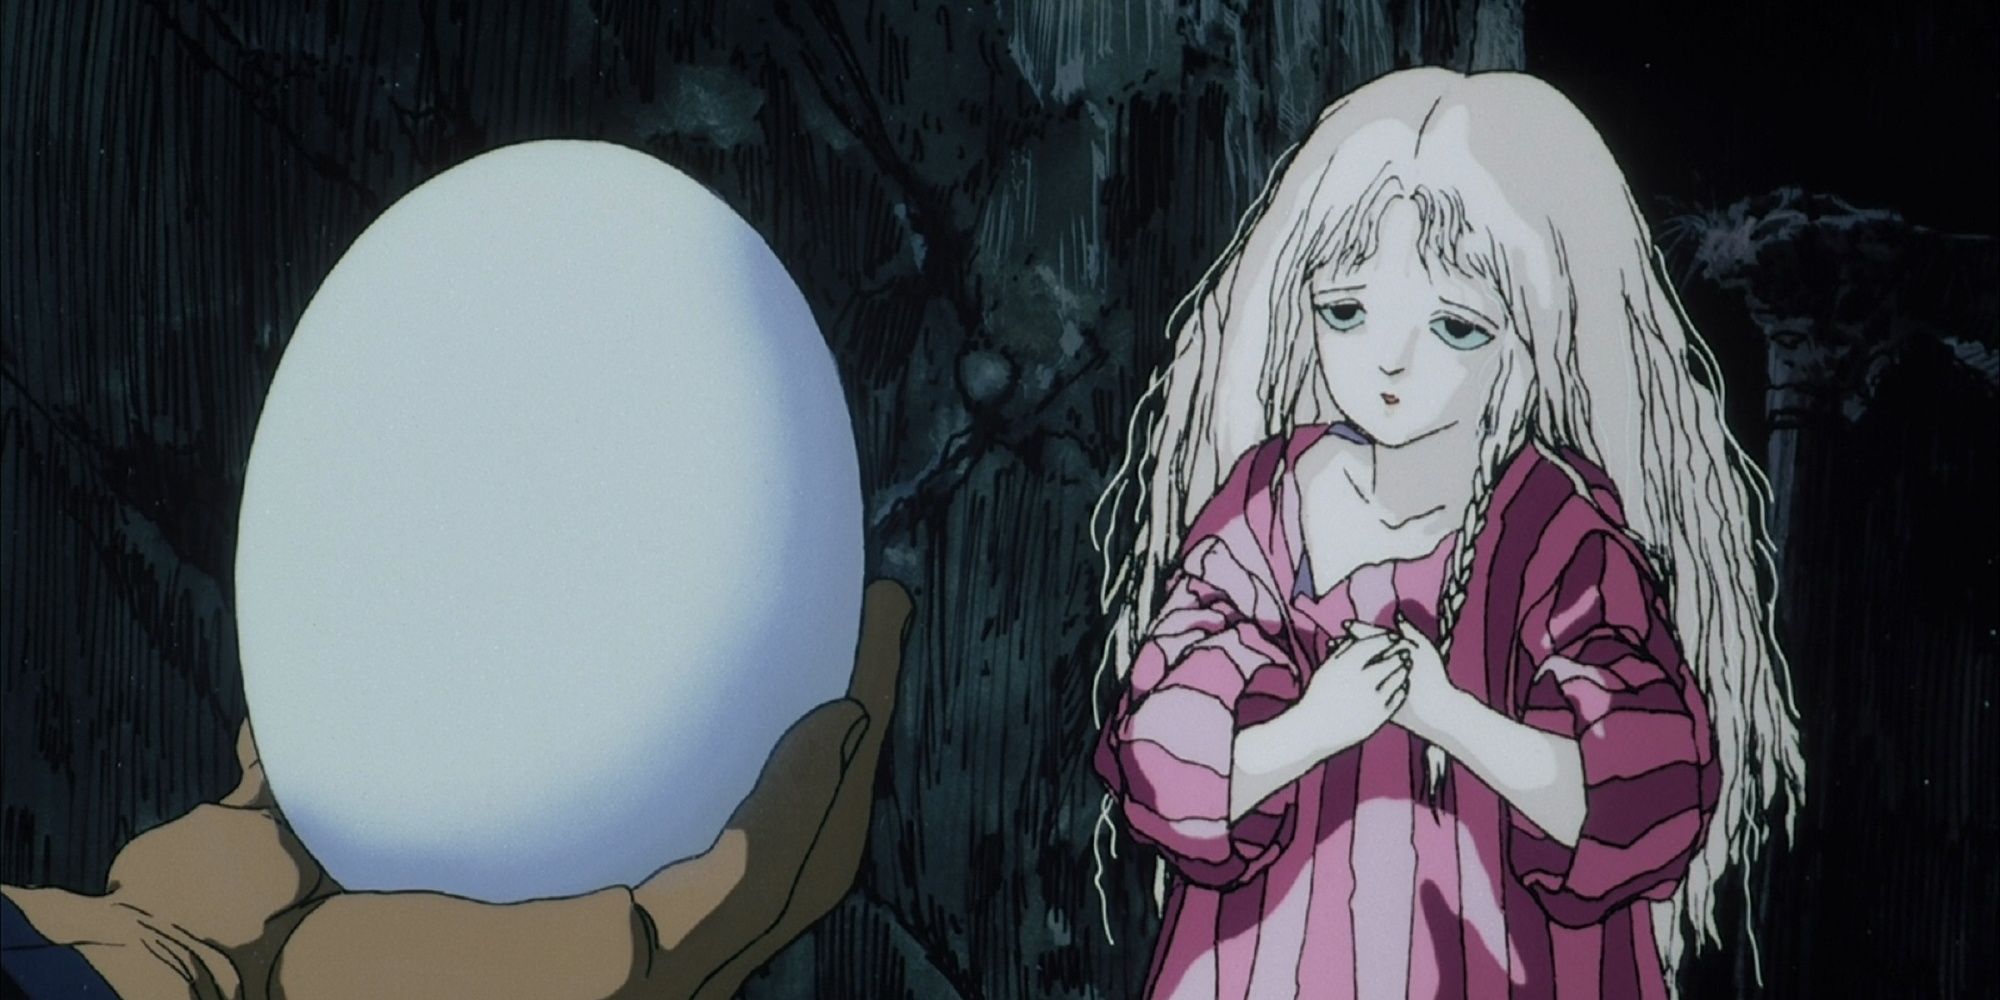 The young girl and her egg in Angel's Egg.